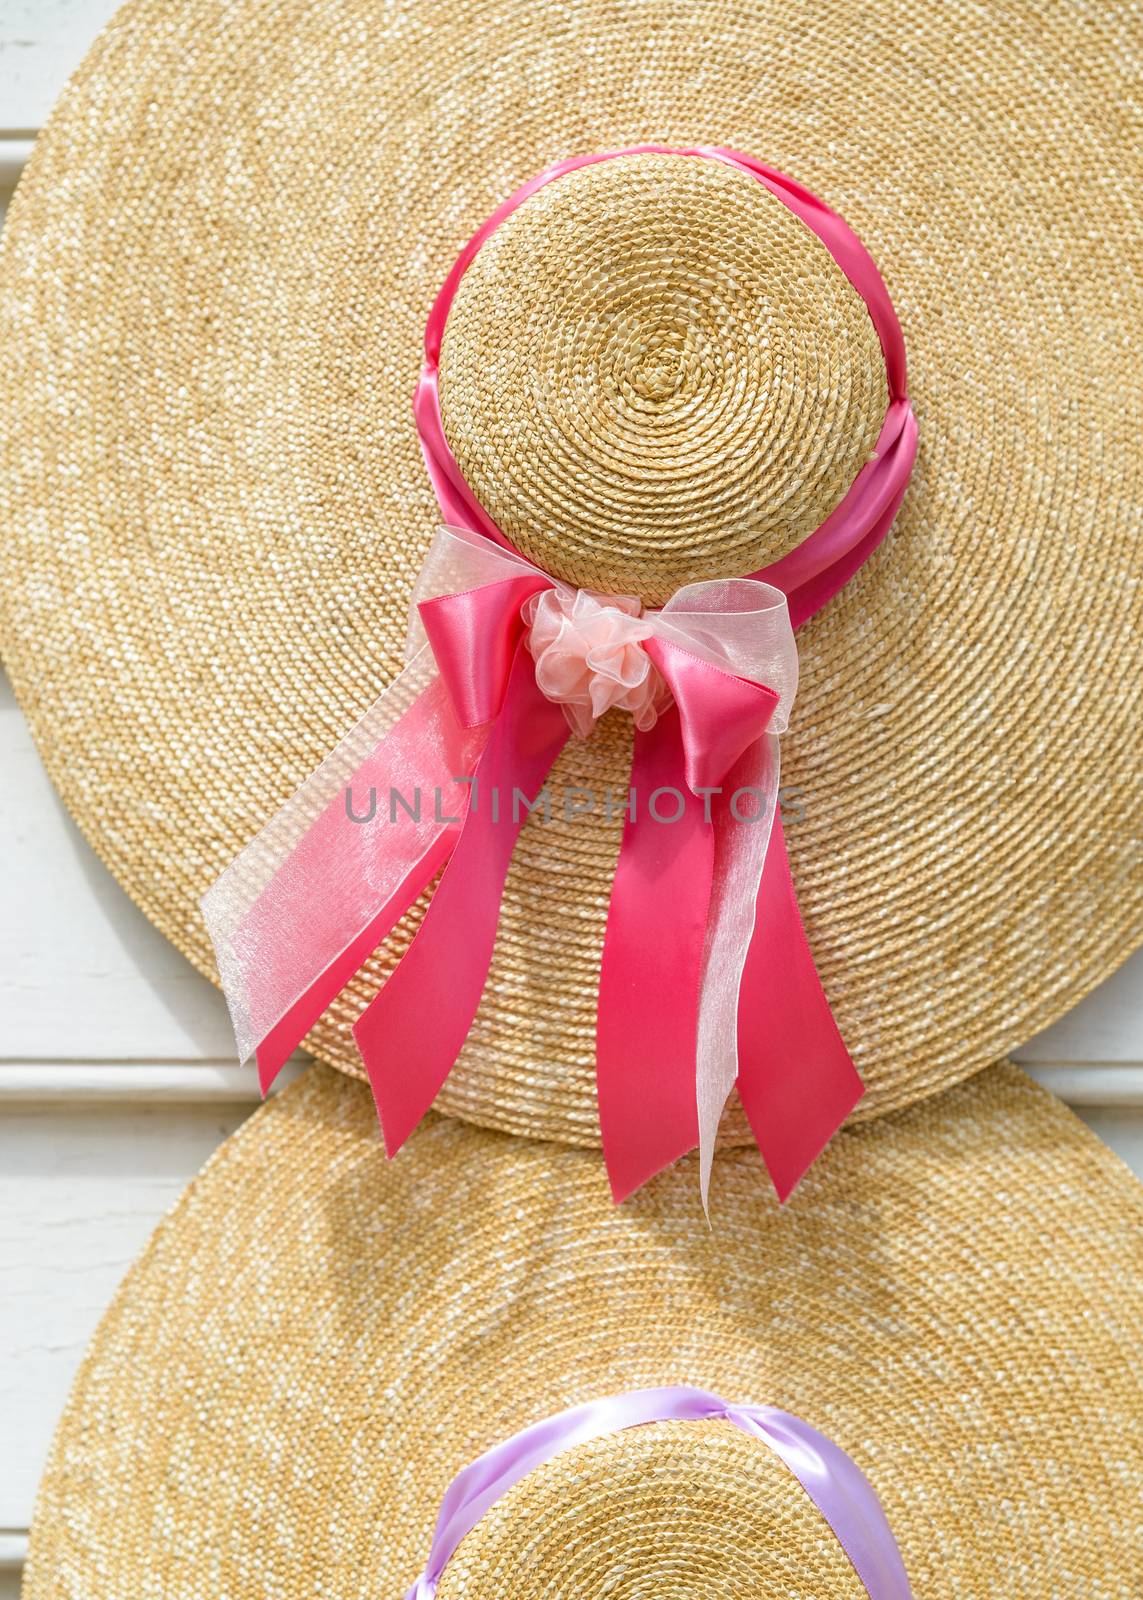 Traditional straw hats with ribbons